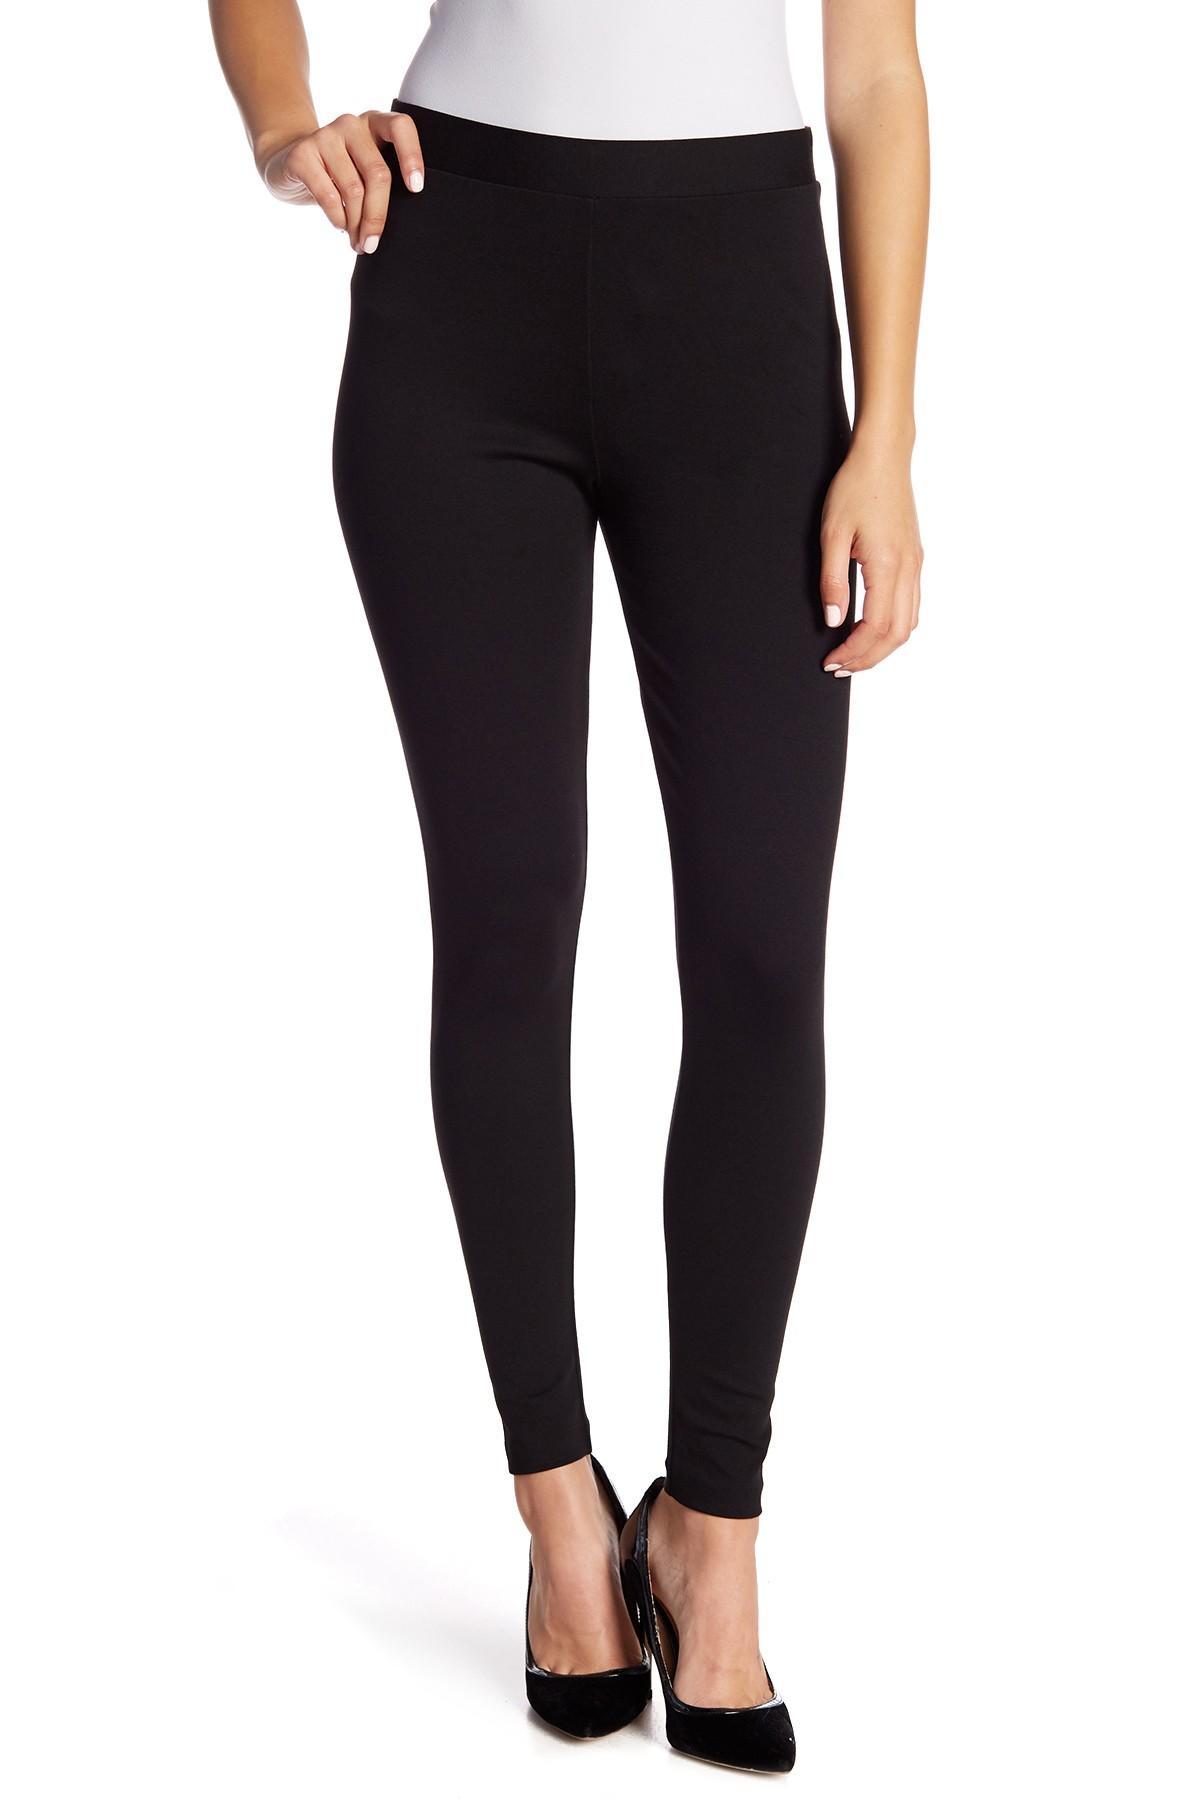 Vince Camuto Synthetic Pull-on Ponte Leggings (petite) in Black - Lyst